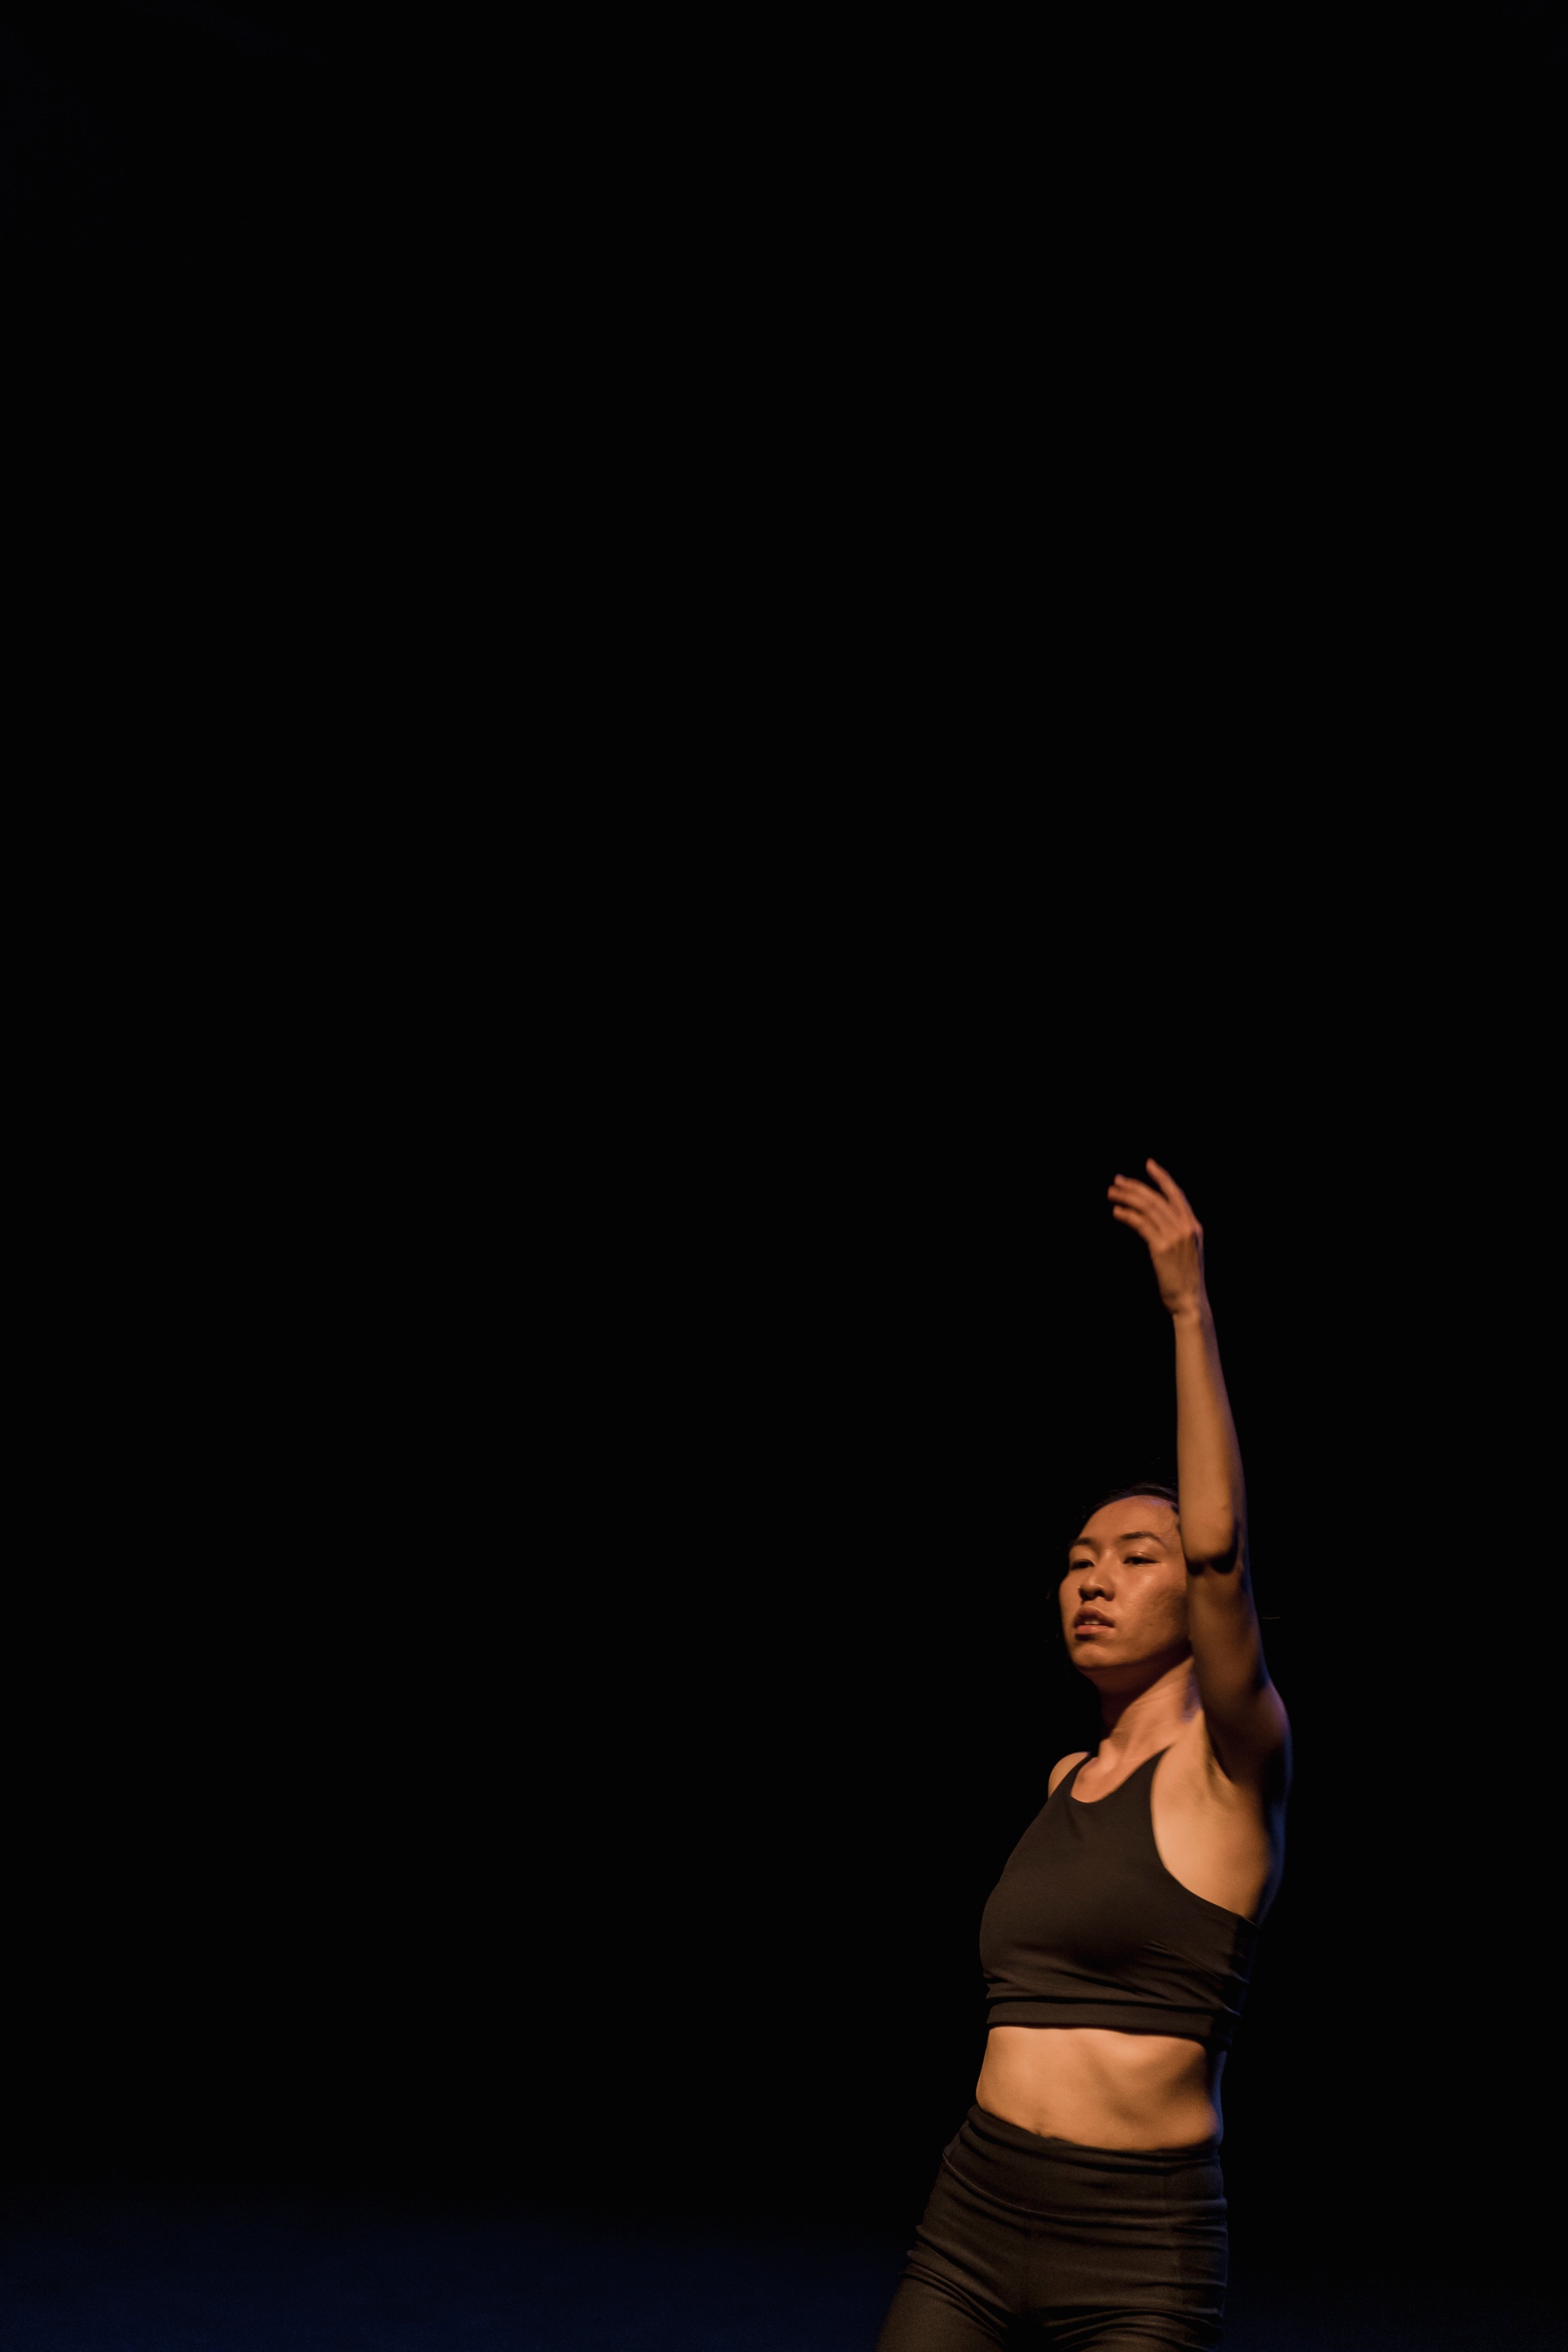 A portrait of dancer Lai Yi Ohlsen. She is seen against a dark background at the bottom right of the photo posing with left arm stretched directly above her head, as if mid-dance. 